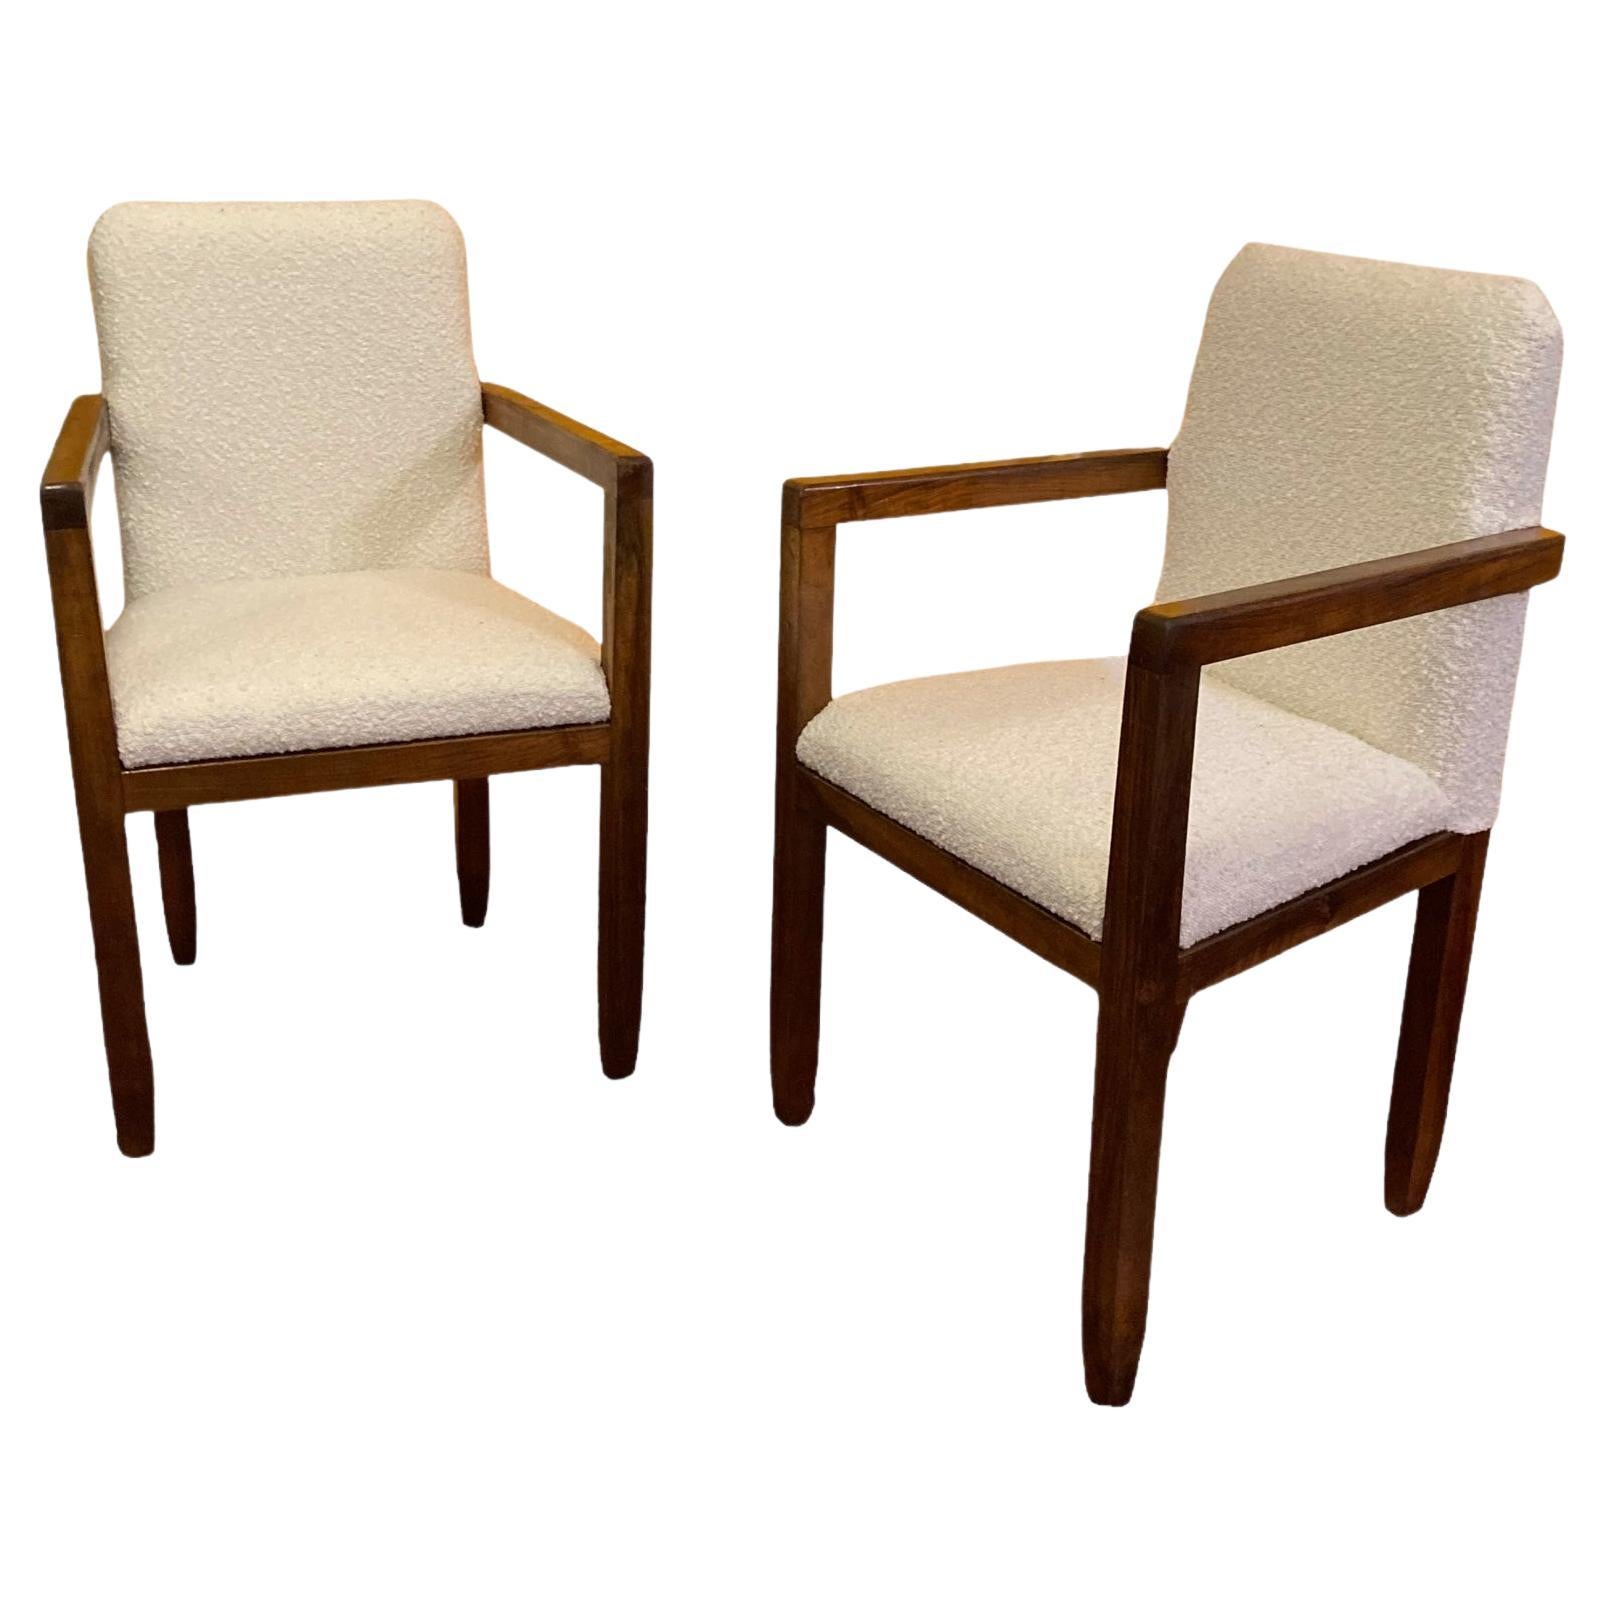 A Pair of Art Deco Mahogany framed Armchairs, White Boucle Upholstery 1920's For Sale